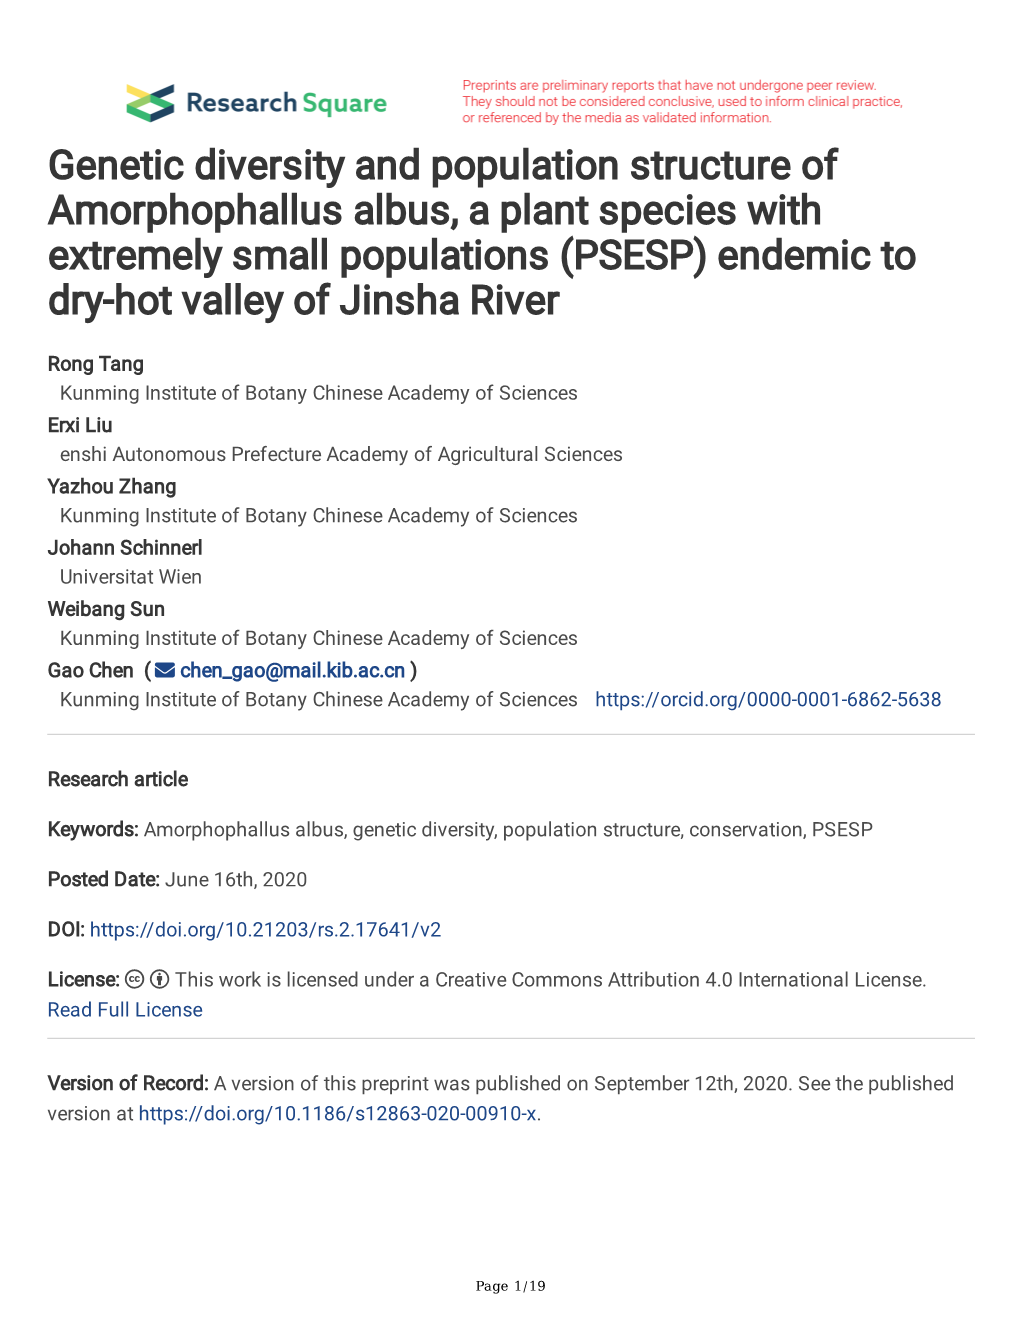 Genetic Diversity and Population Structure of Amorphophallus Albus, a Plant Species with Extremely Small Populations (PSESP) Endemic to Dry-Hot Valley of Jinsha River